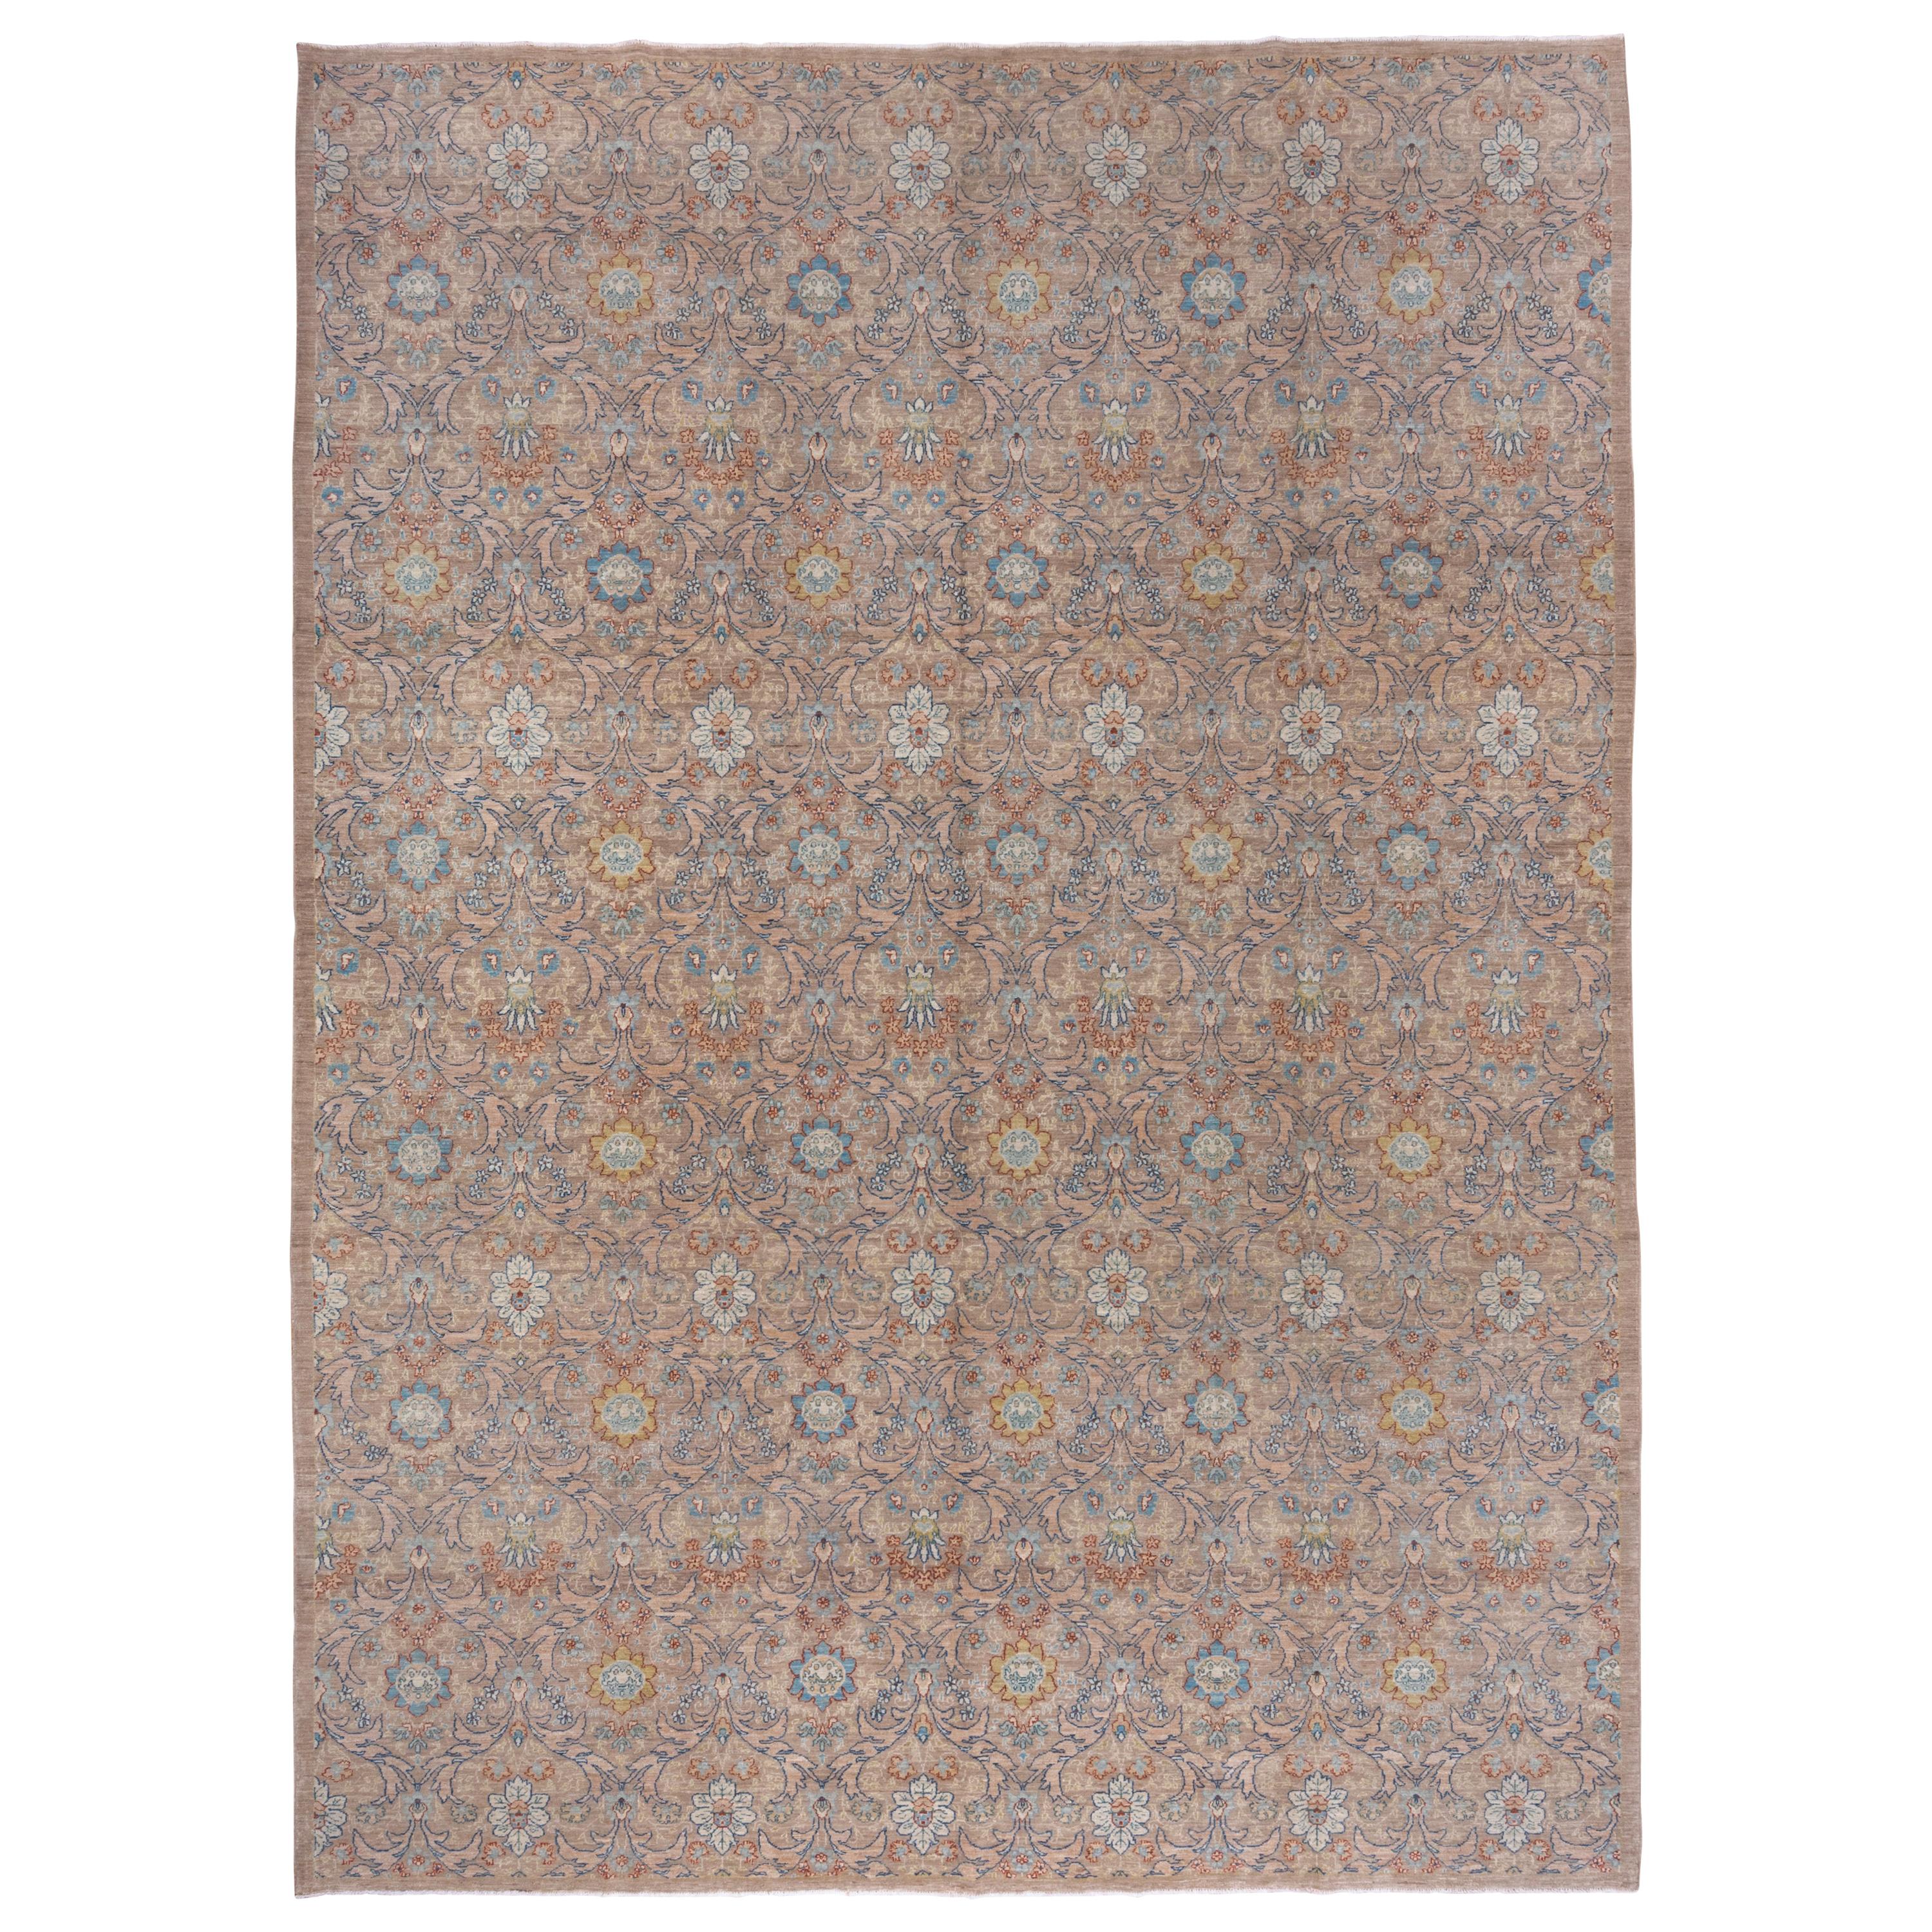 Hand Knotted Modern and Decorative Afghan Carpet